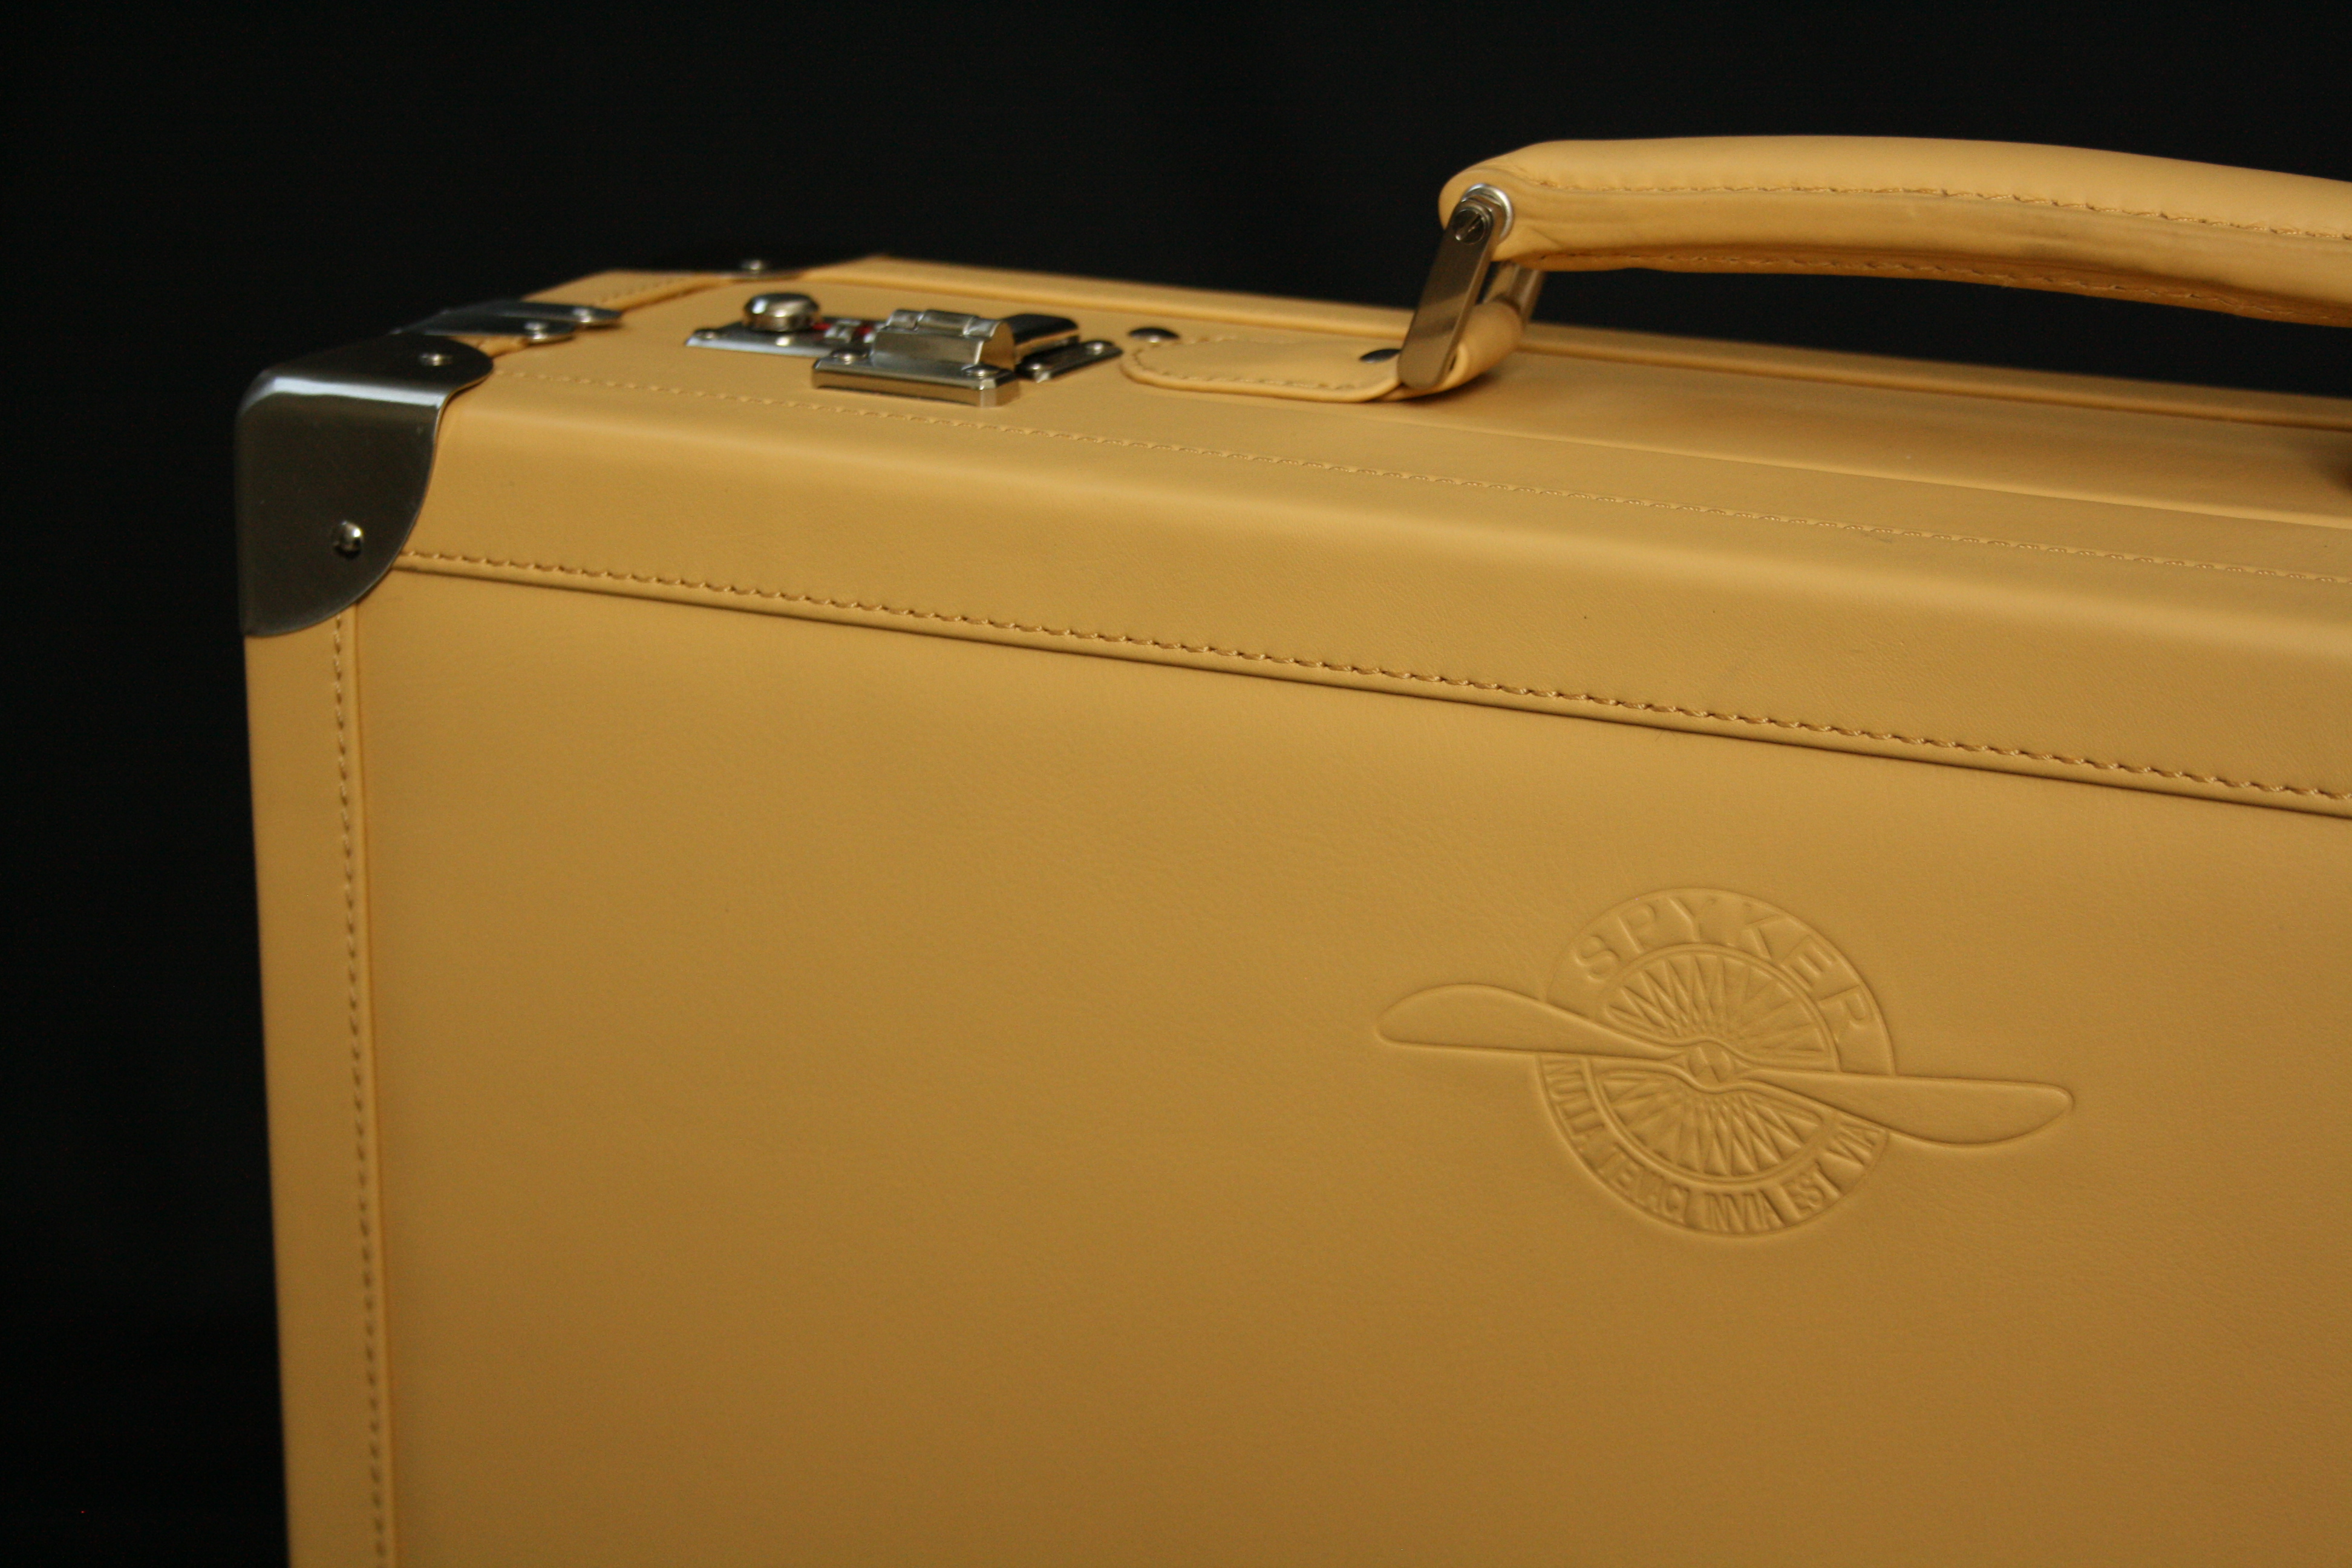 Spyker fitted luggage